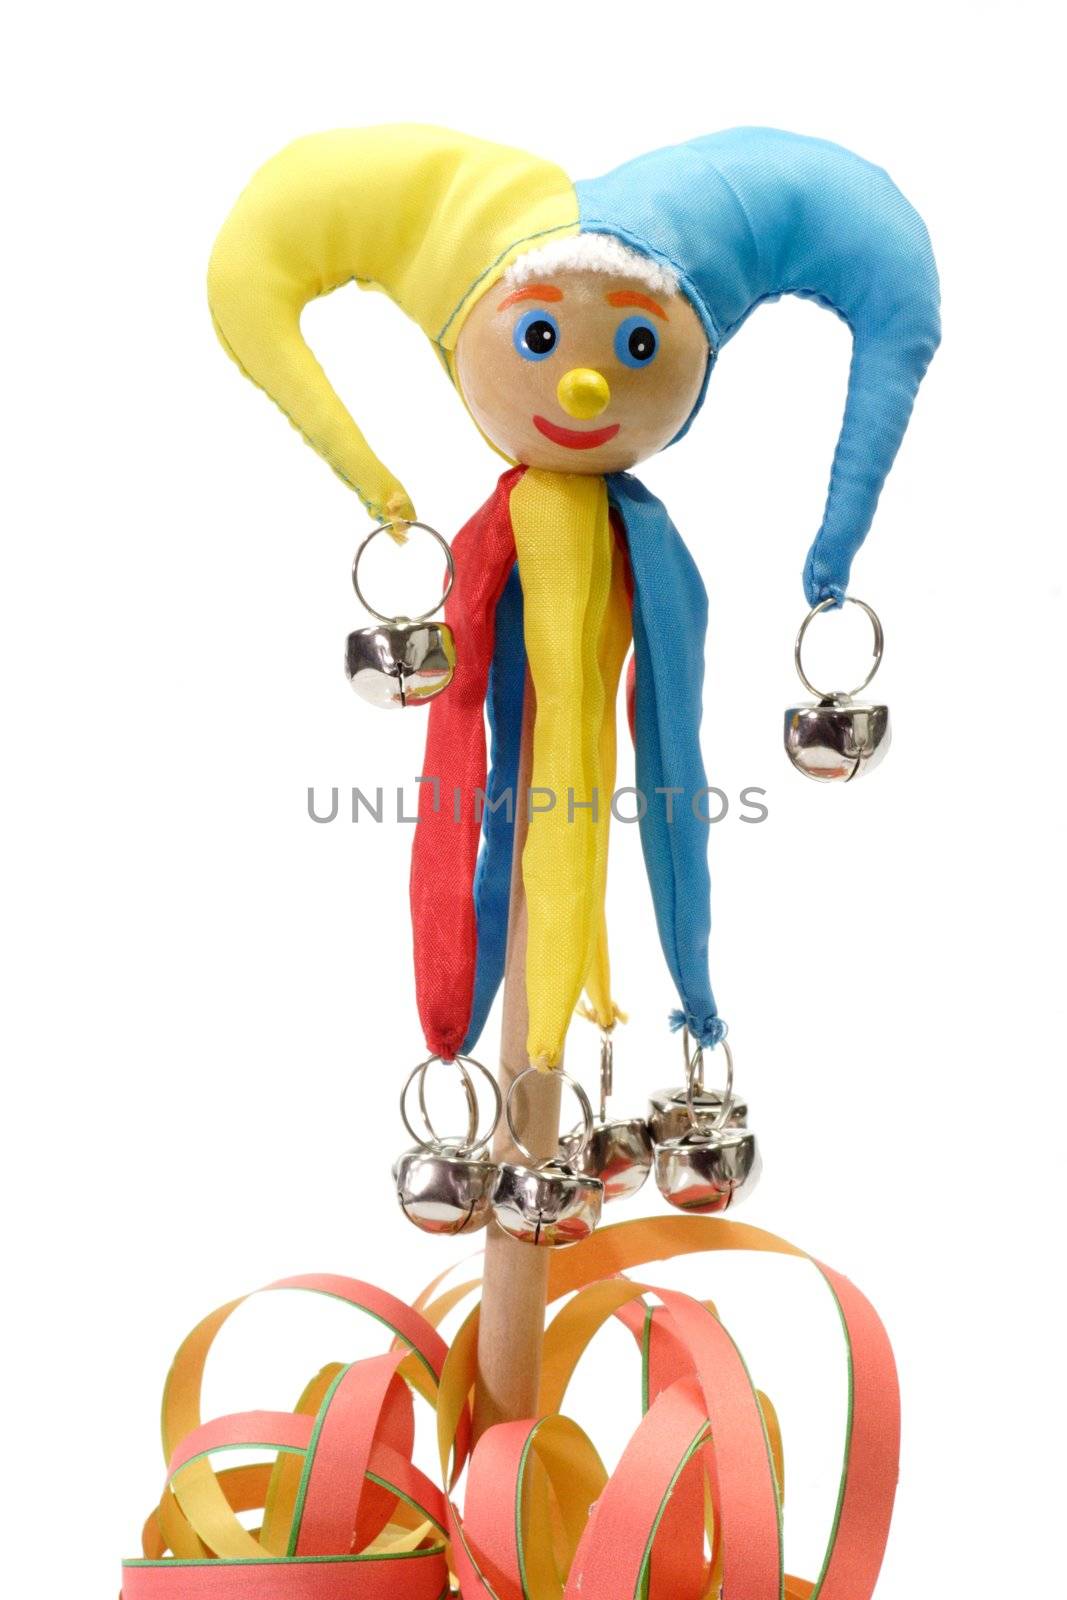 Colorful jester puppet with bells - isolated on white background